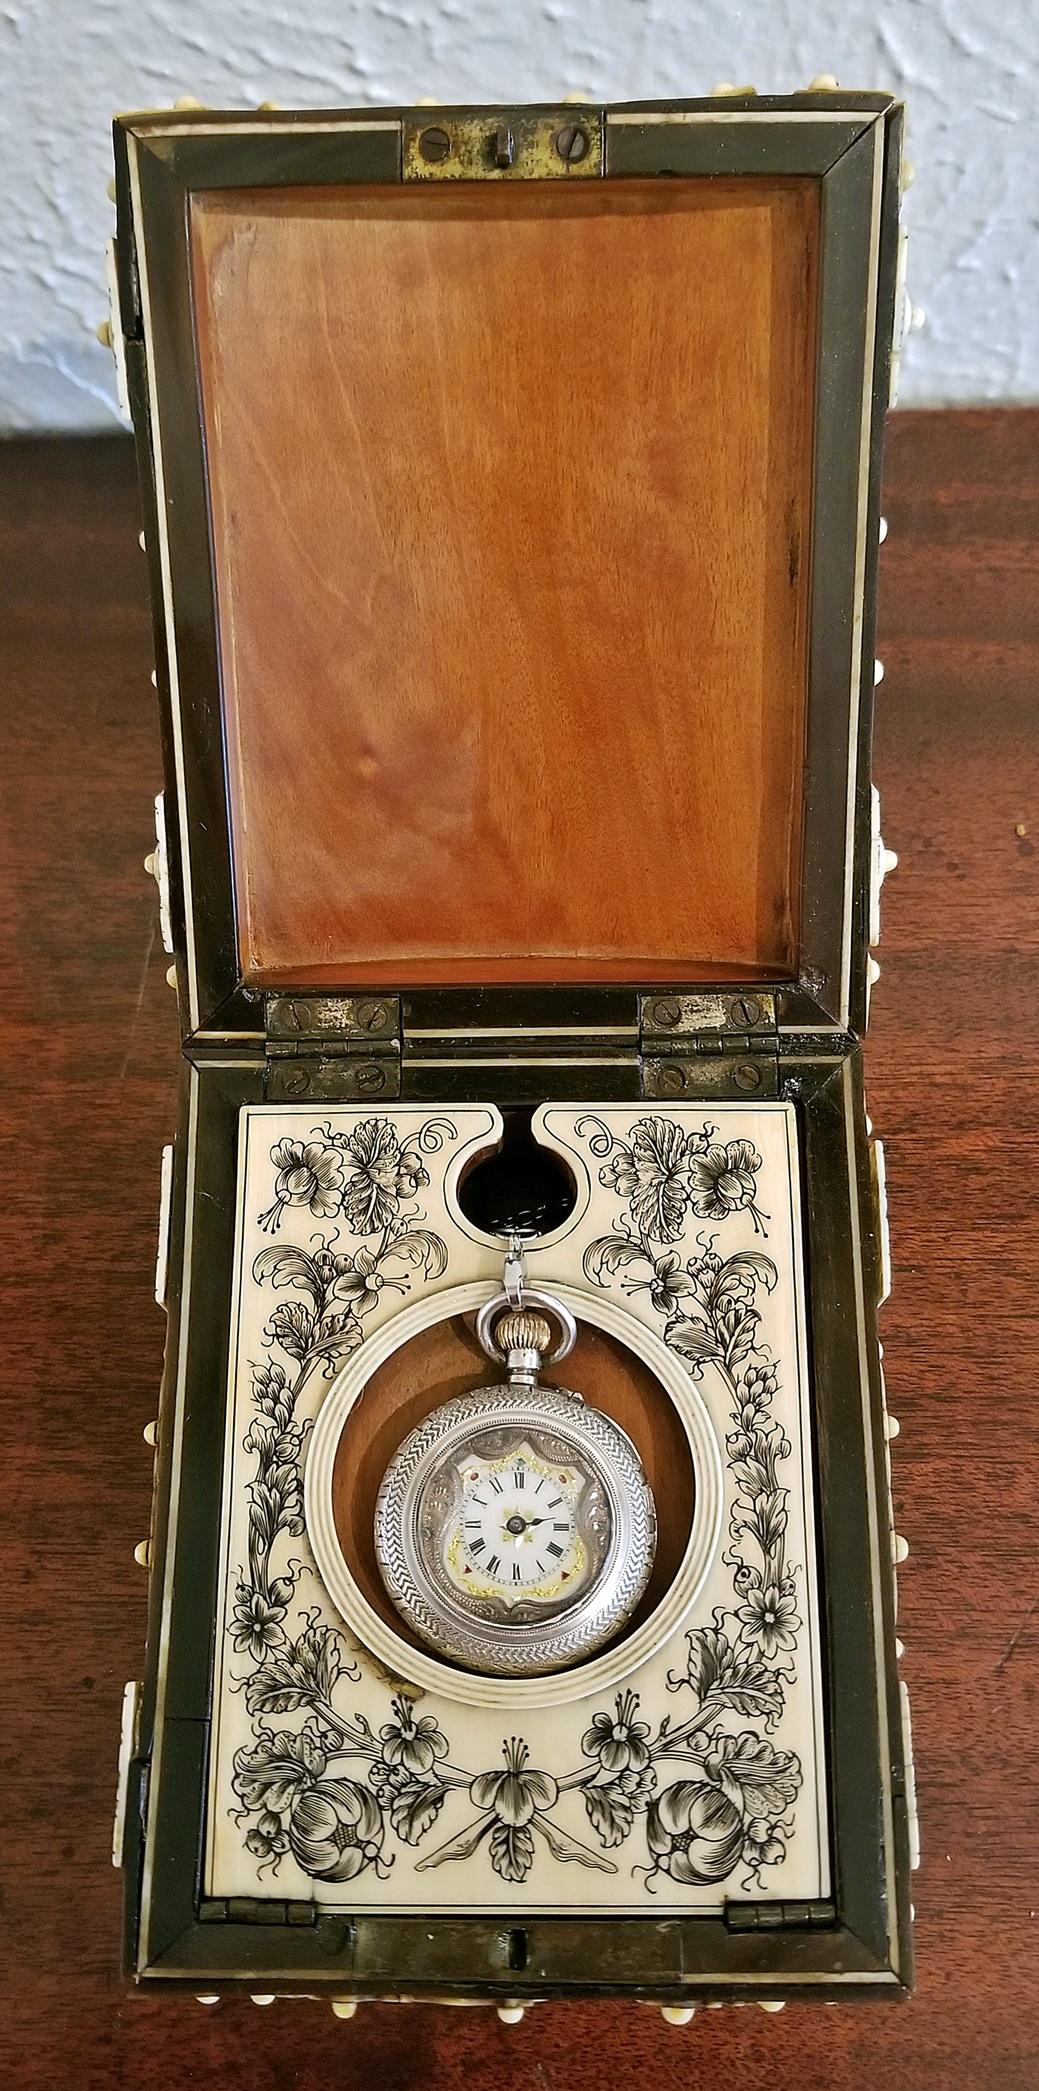 Hand-Crafted 18th Century Anglo-Indian Vizigapatam Pocket Watch Display Box